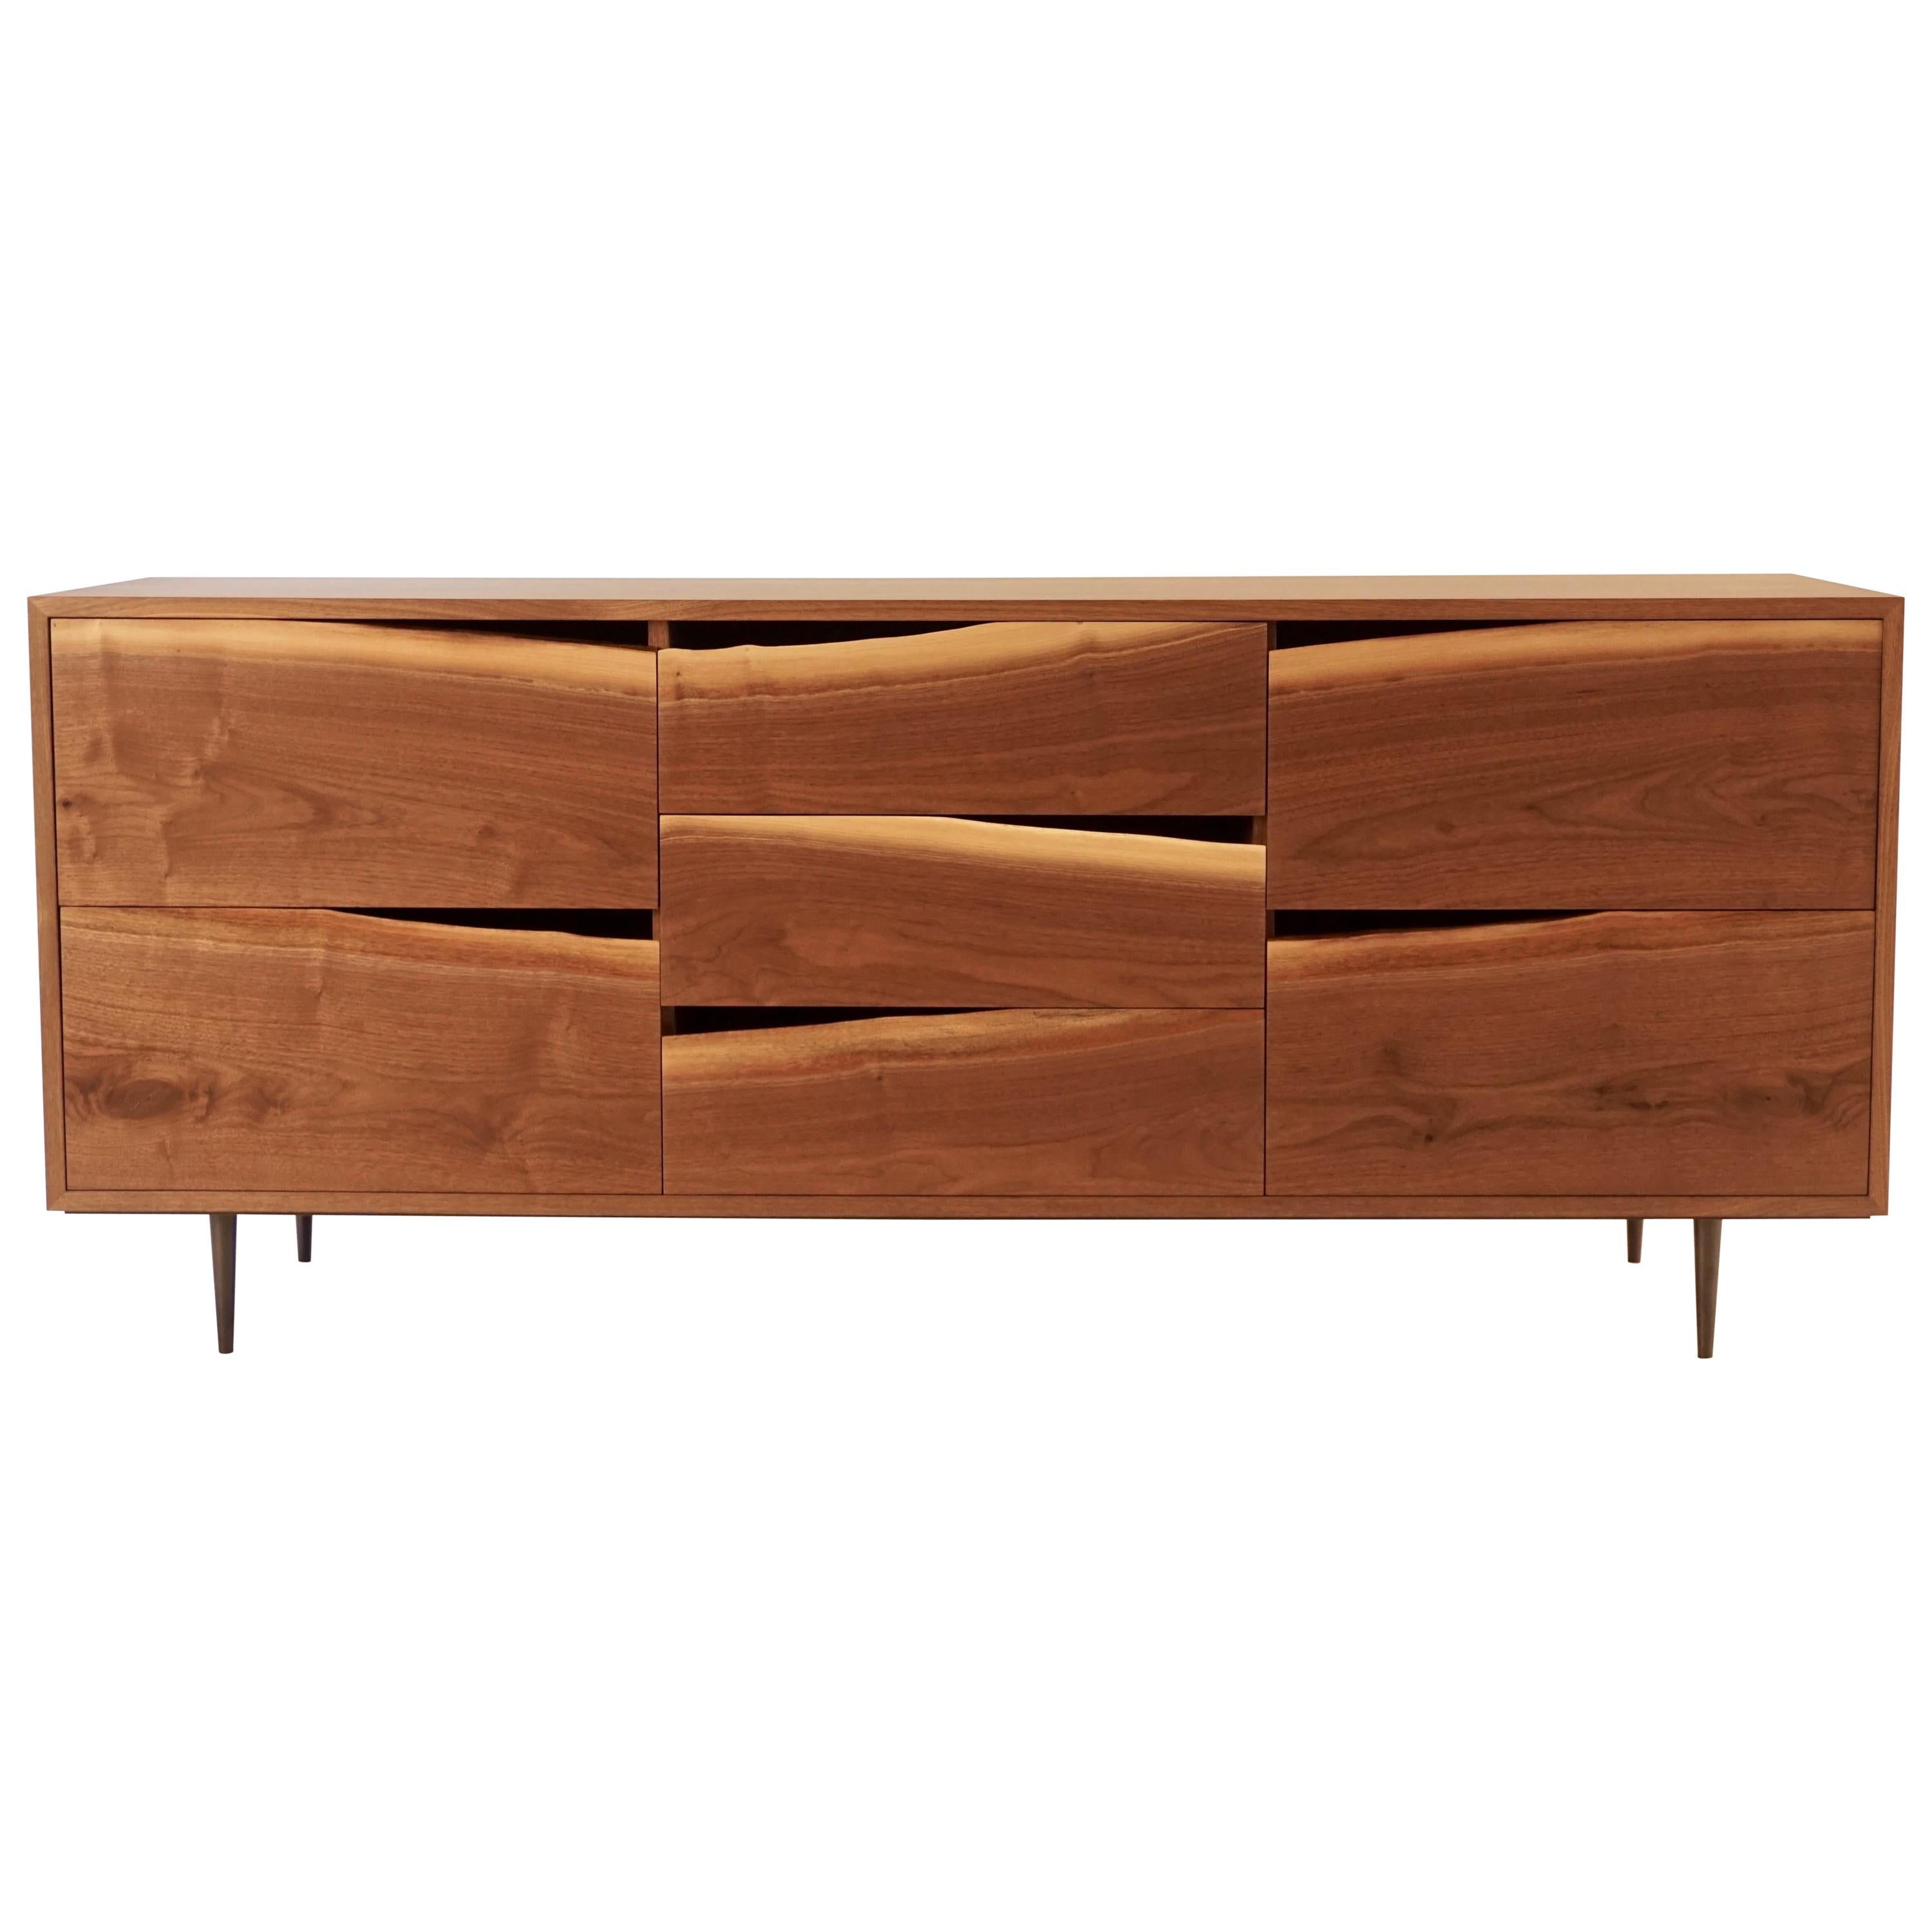 Walnut Credenza with Natural Edged Drawer-Fronts and Turned Bronze Legs For Sale